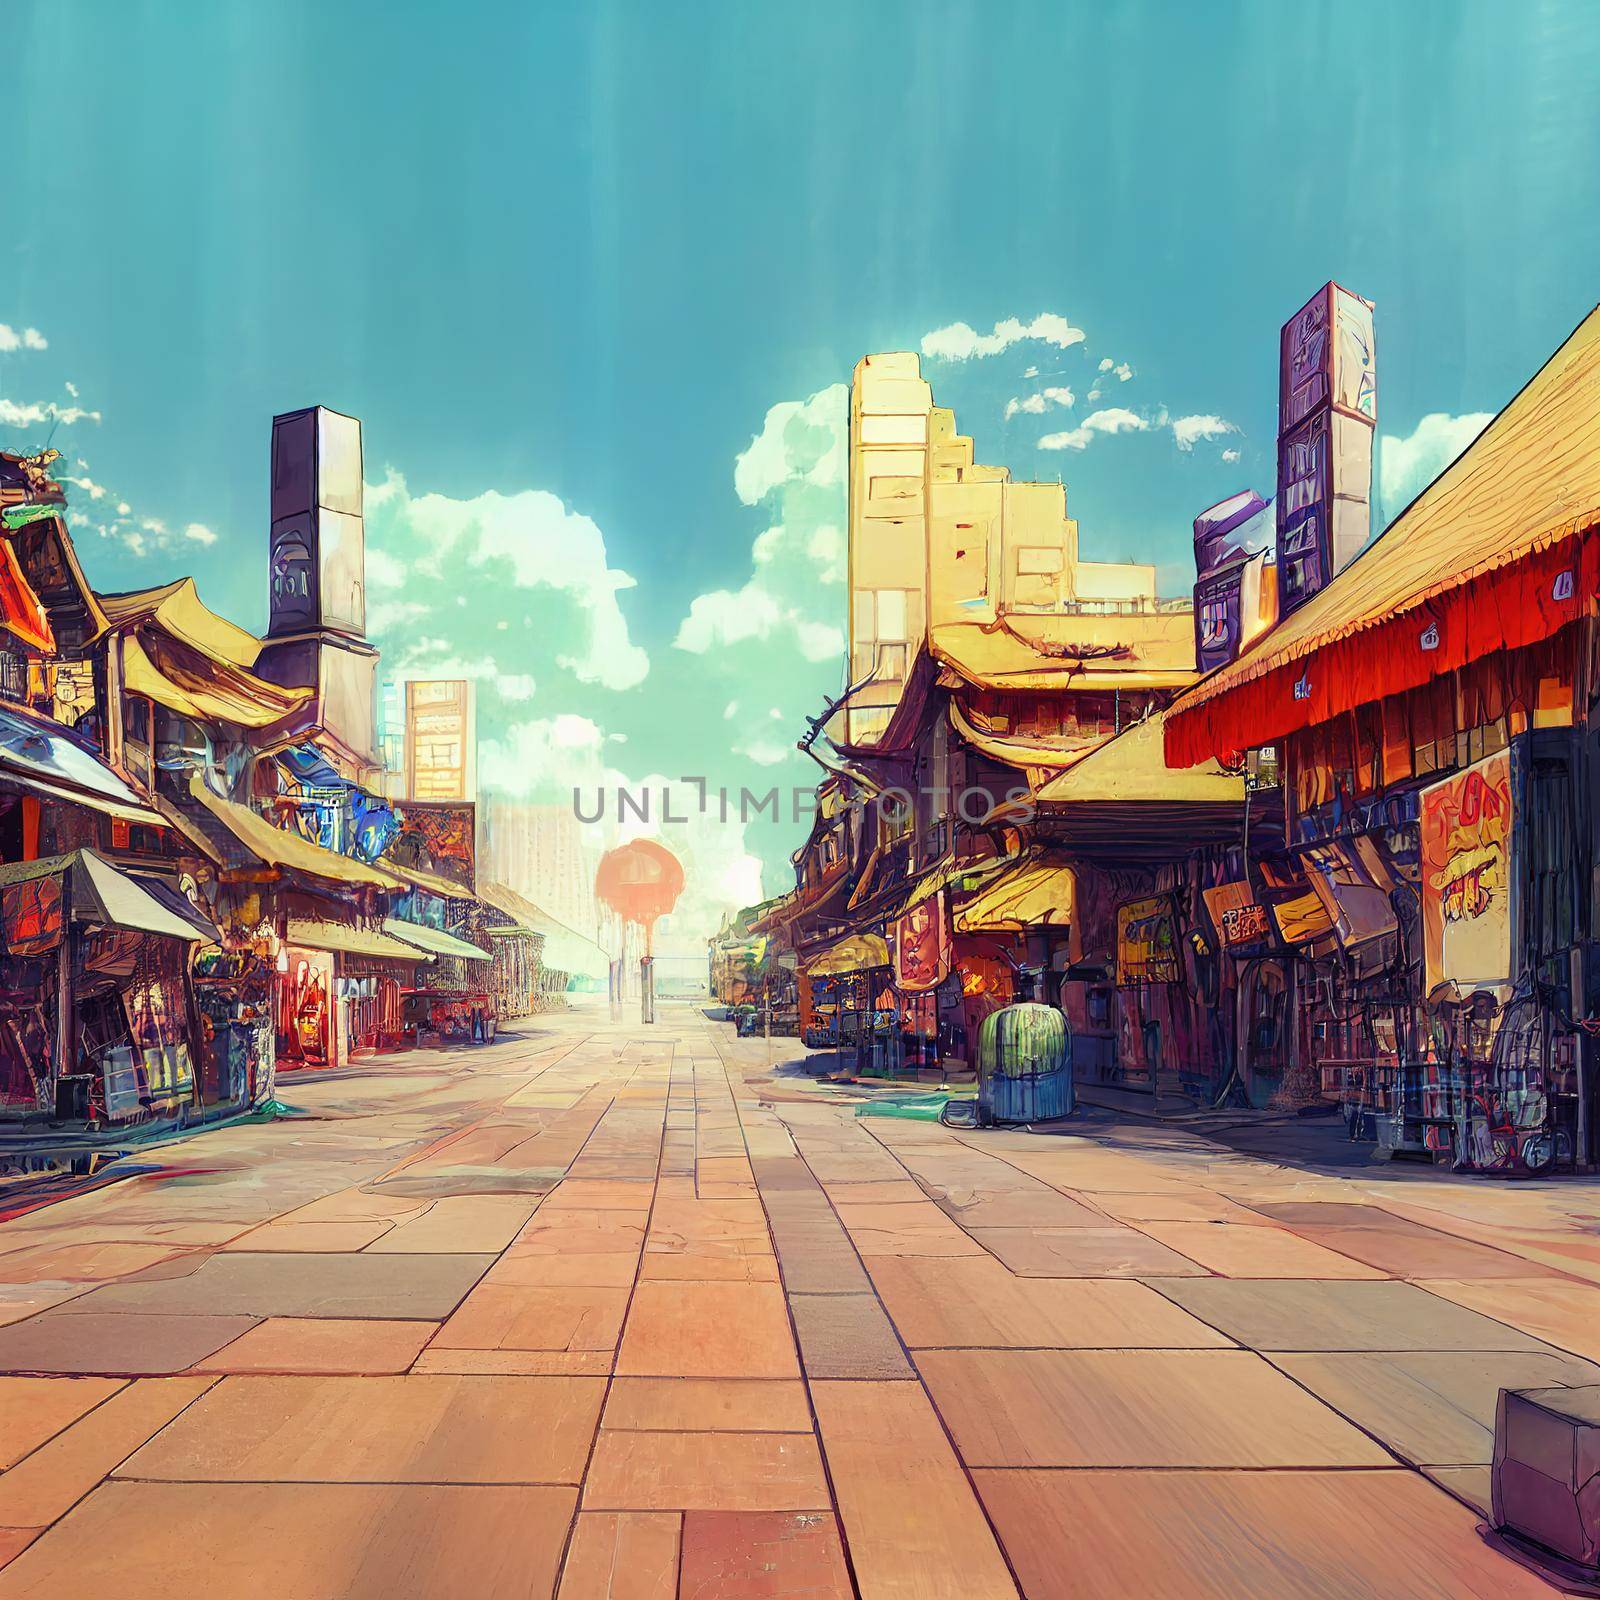 2d drawing illustrations of shops in anime style city. High quality 3d illustration